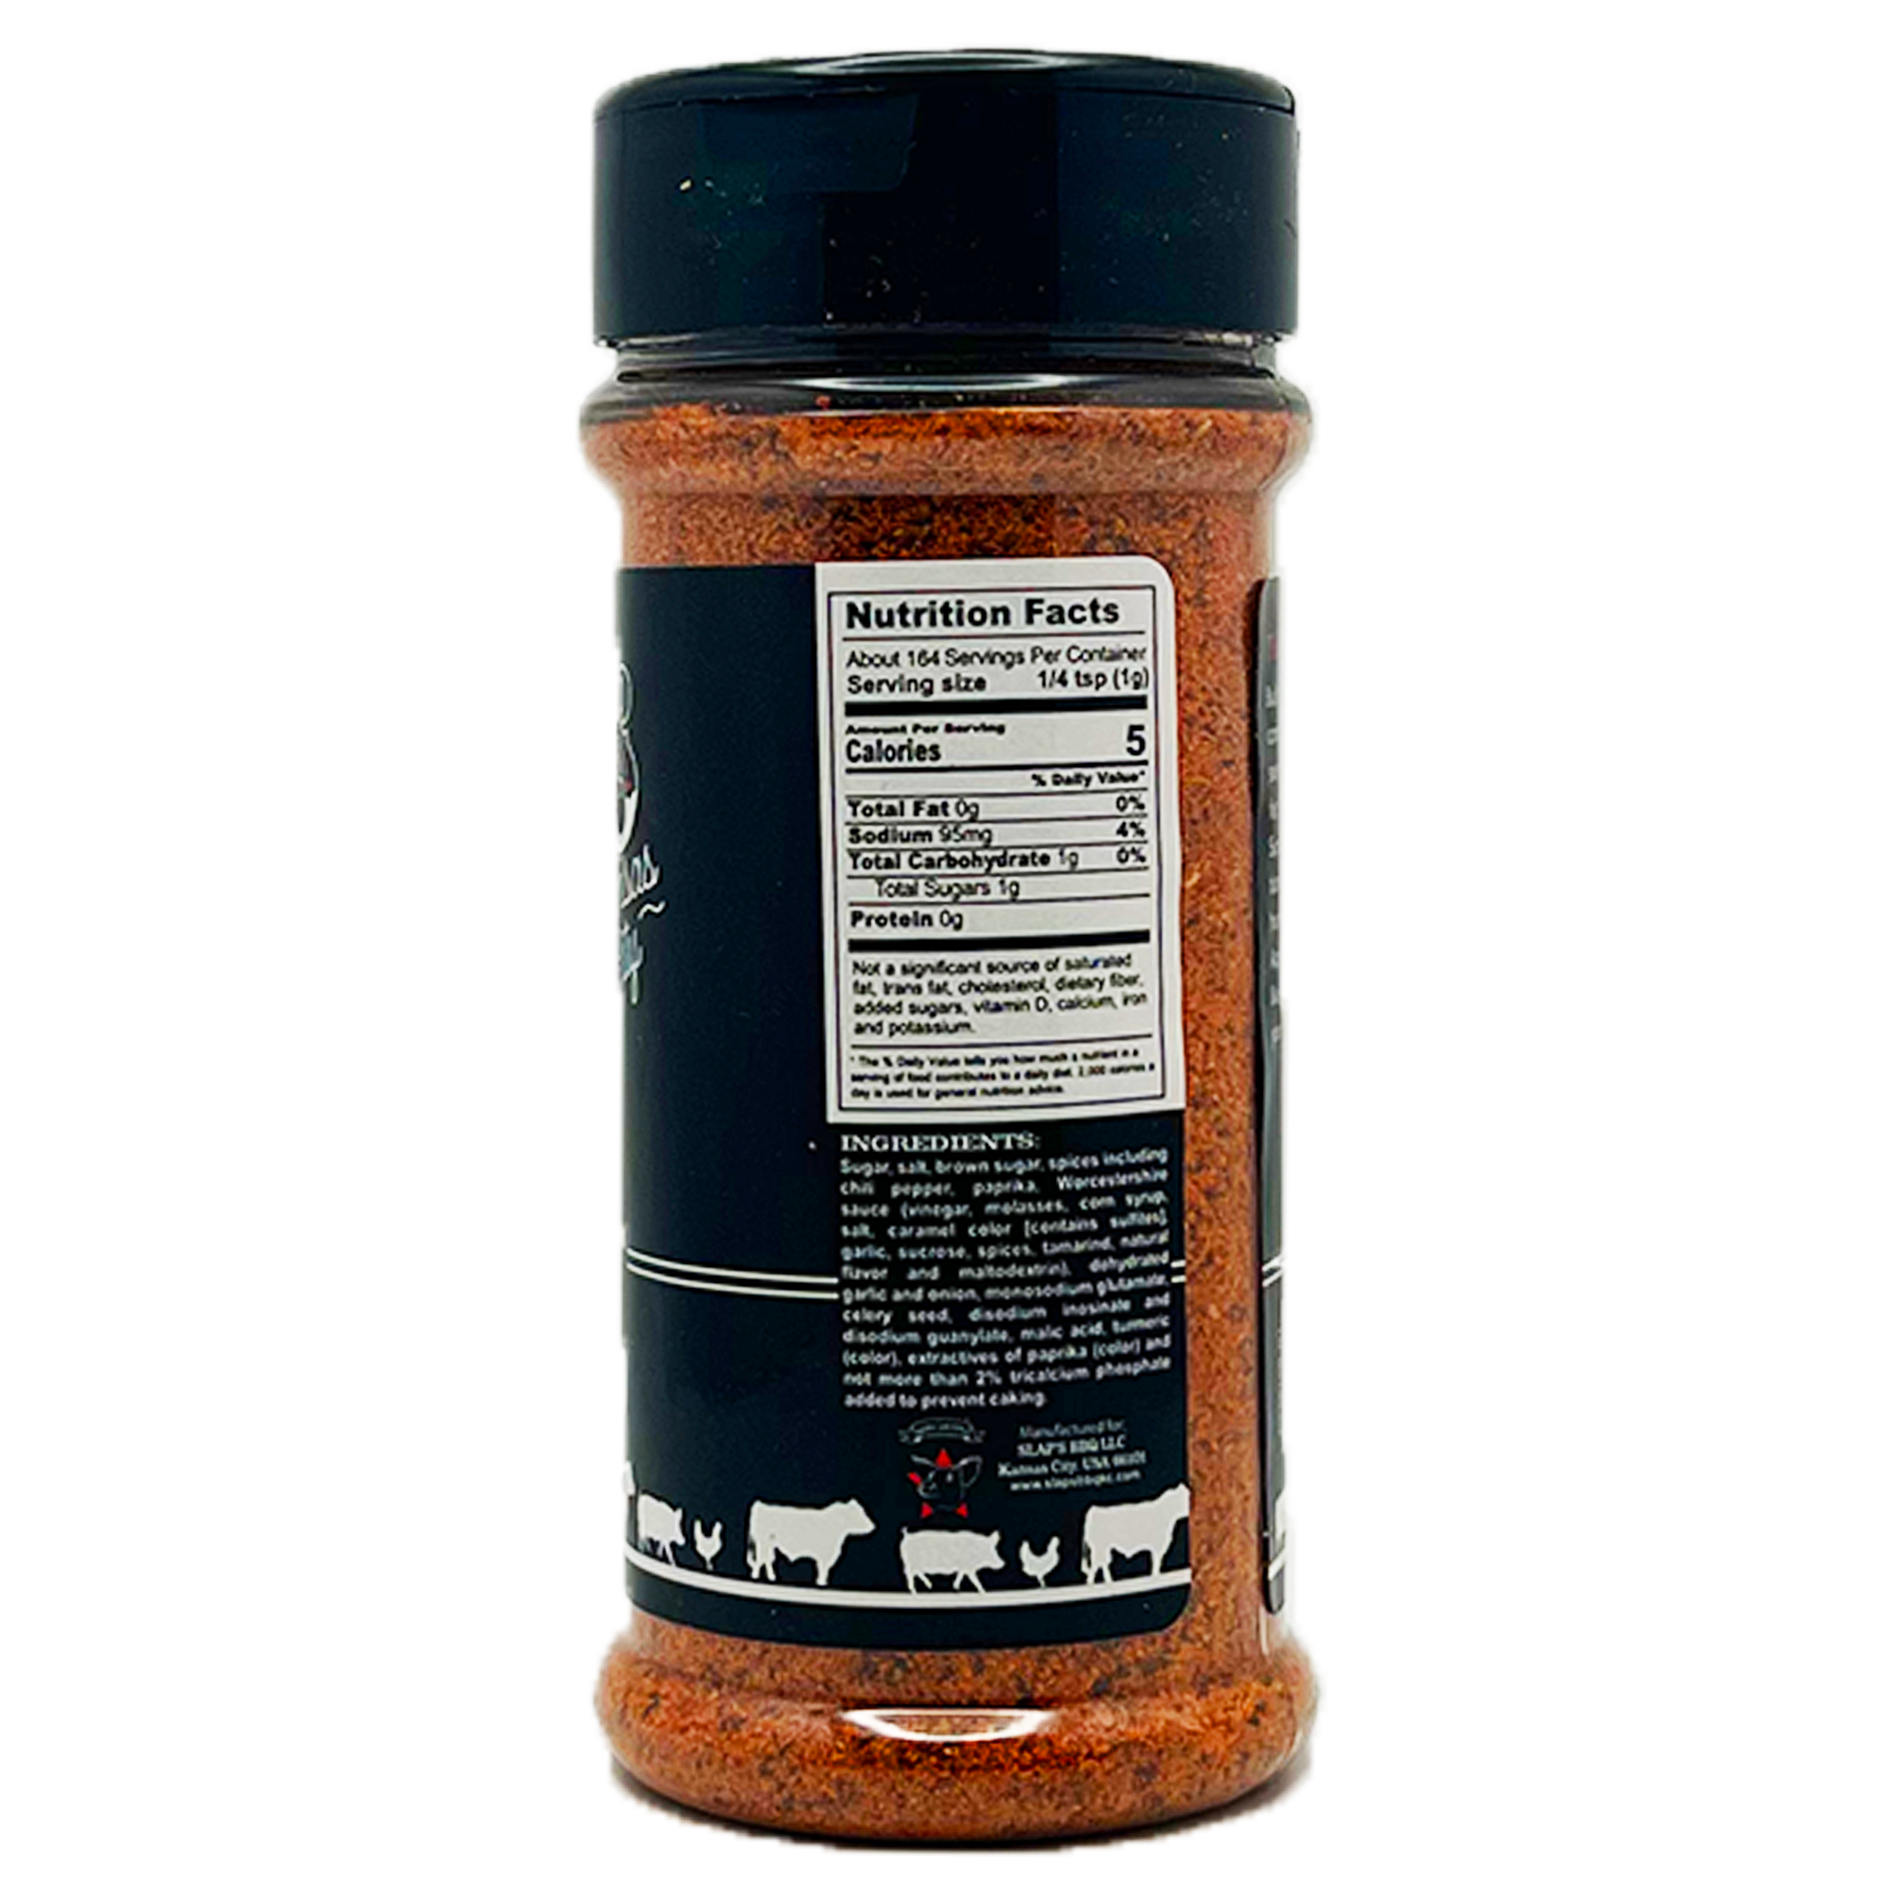 The back view of a bottle of Slap's BBQ seasoning. It shows the nutritional facts and ingredients list. The label indicates there are about 164 servings per container, with each serving size being 1/4 teaspoon (1 gram). The bottom of the label features illustrations of various animals.